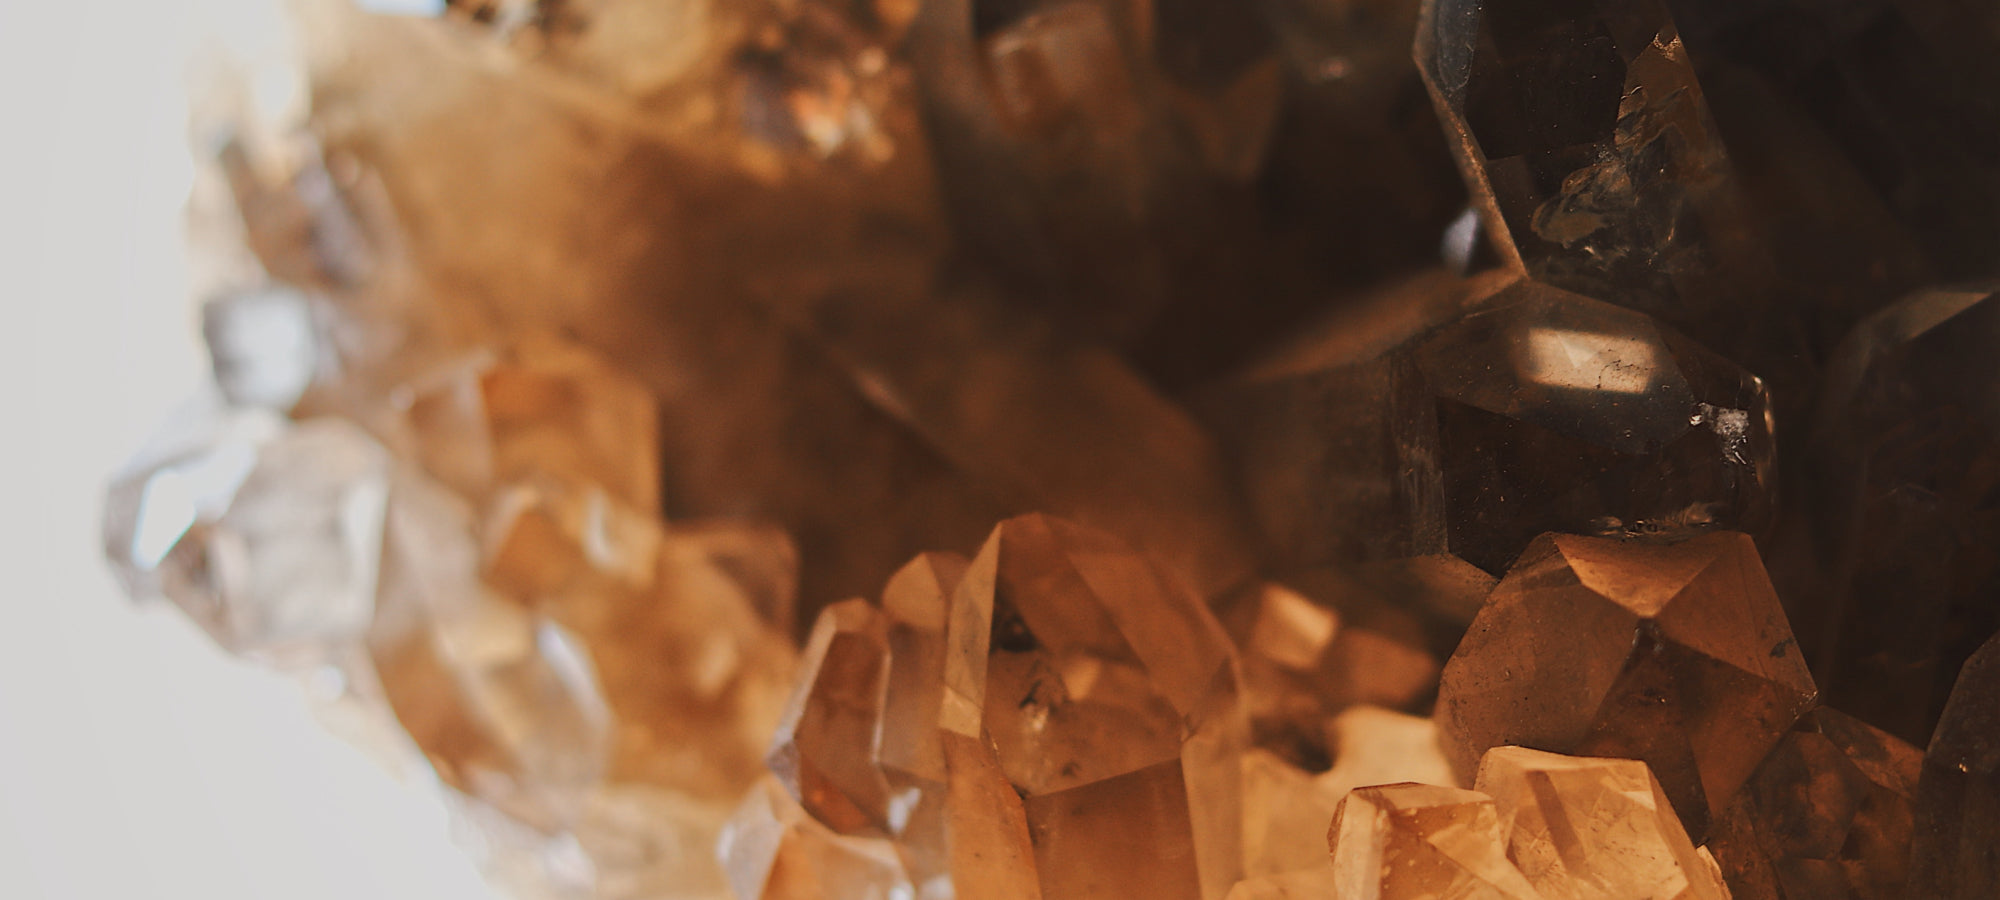 A textural image of a brown translucent crystal